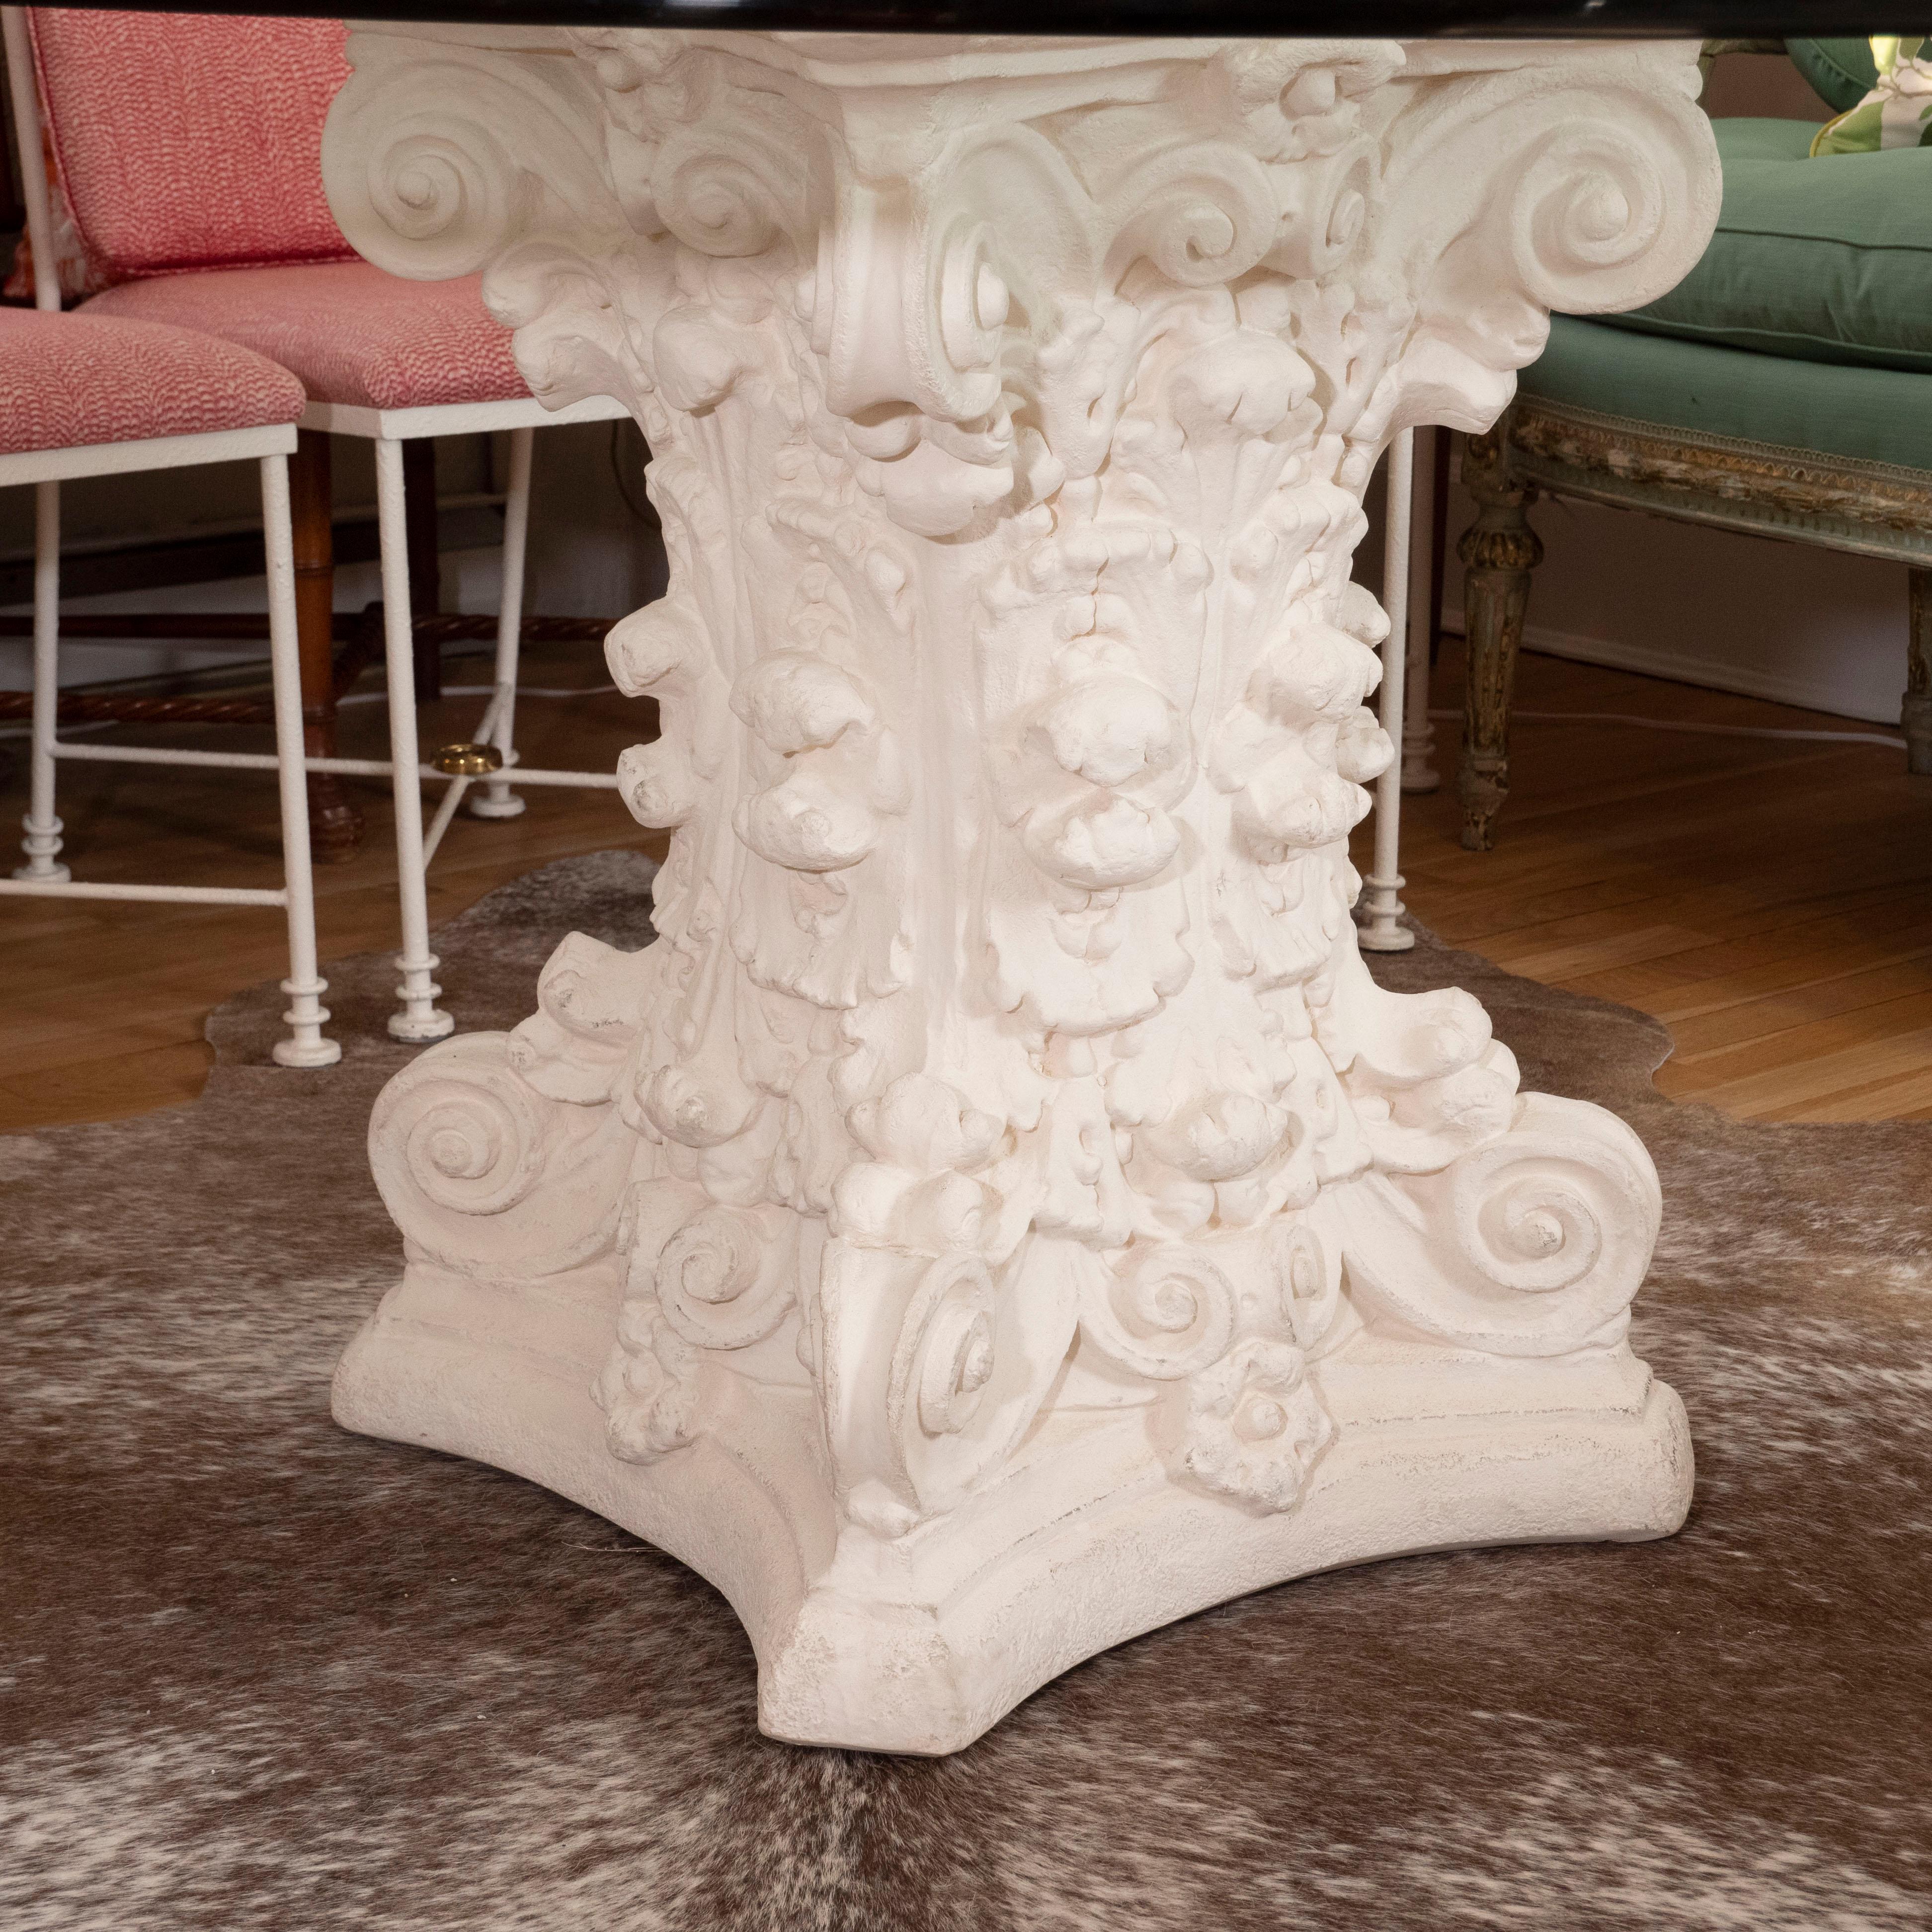 A spectacular dining table with a painted cast concrete sculptural base with a round beveled glass top. Light and airy, this table would look fabulous with either traditional or contemporary chairs.